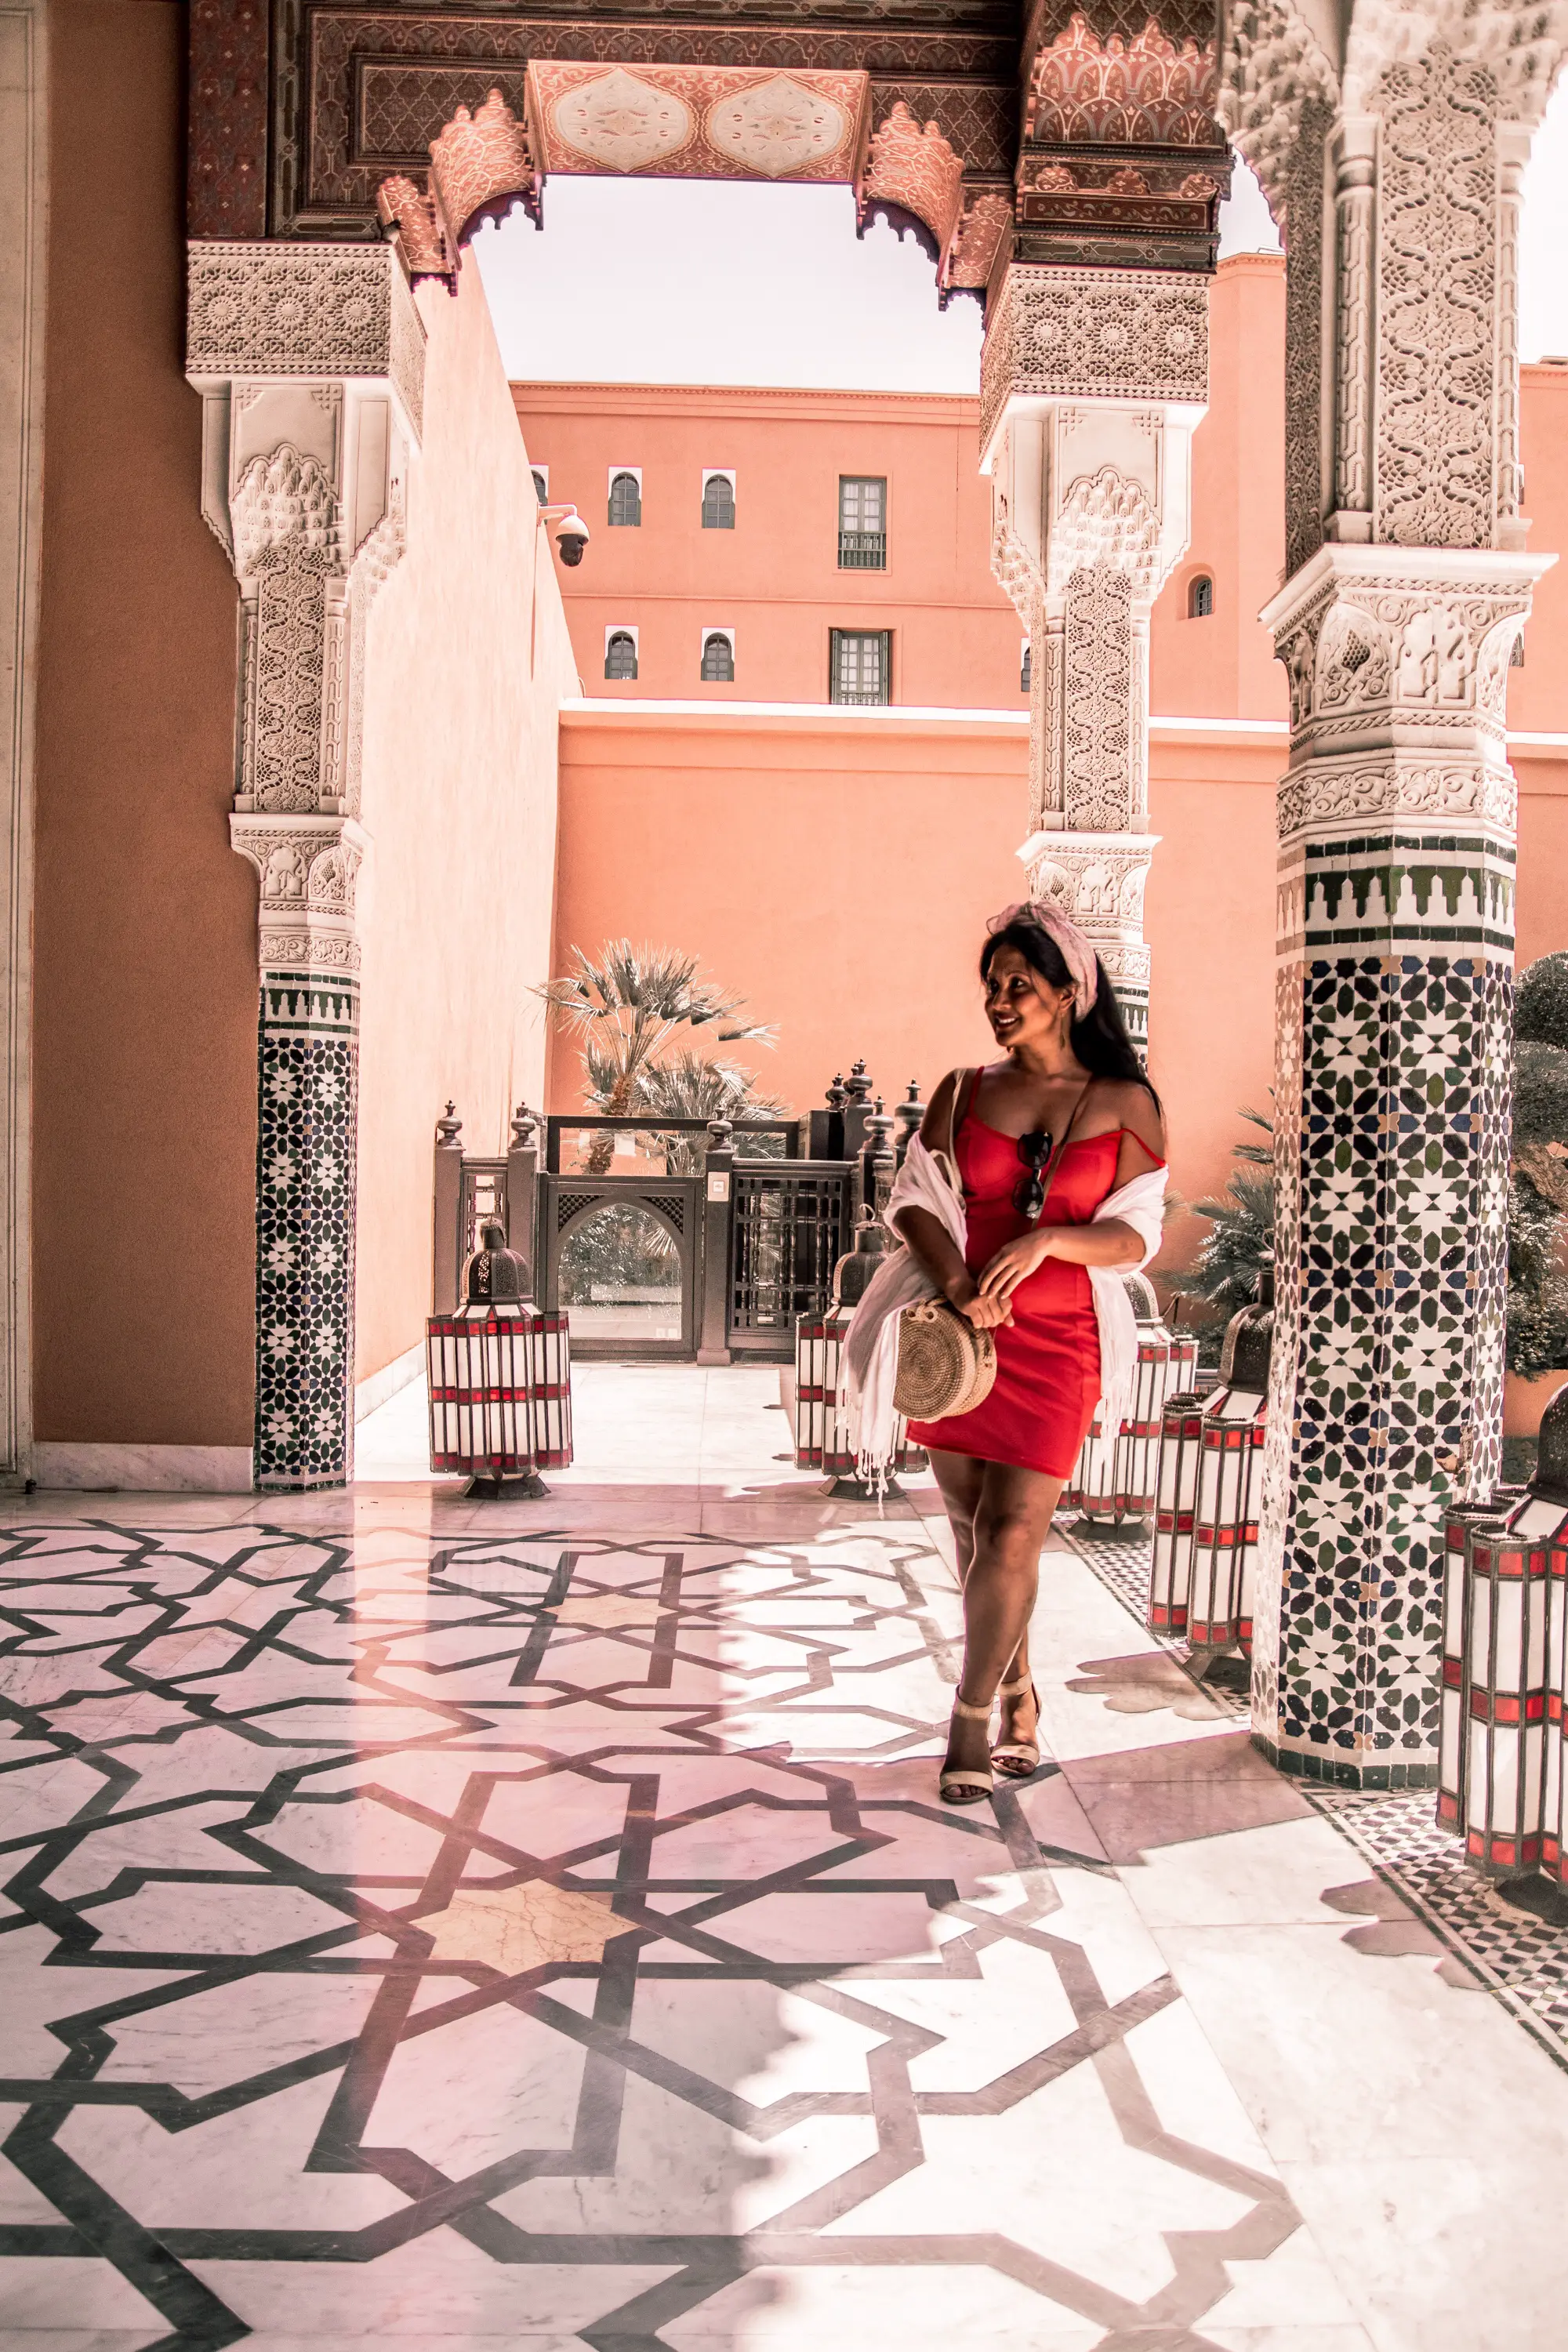 Marjolyn Lago Marj What Color Shoes To Wear With A Red Dress How To Wear A Summer Red Dress What To Wear In Morocco Marrakech Paris Chic Style 9